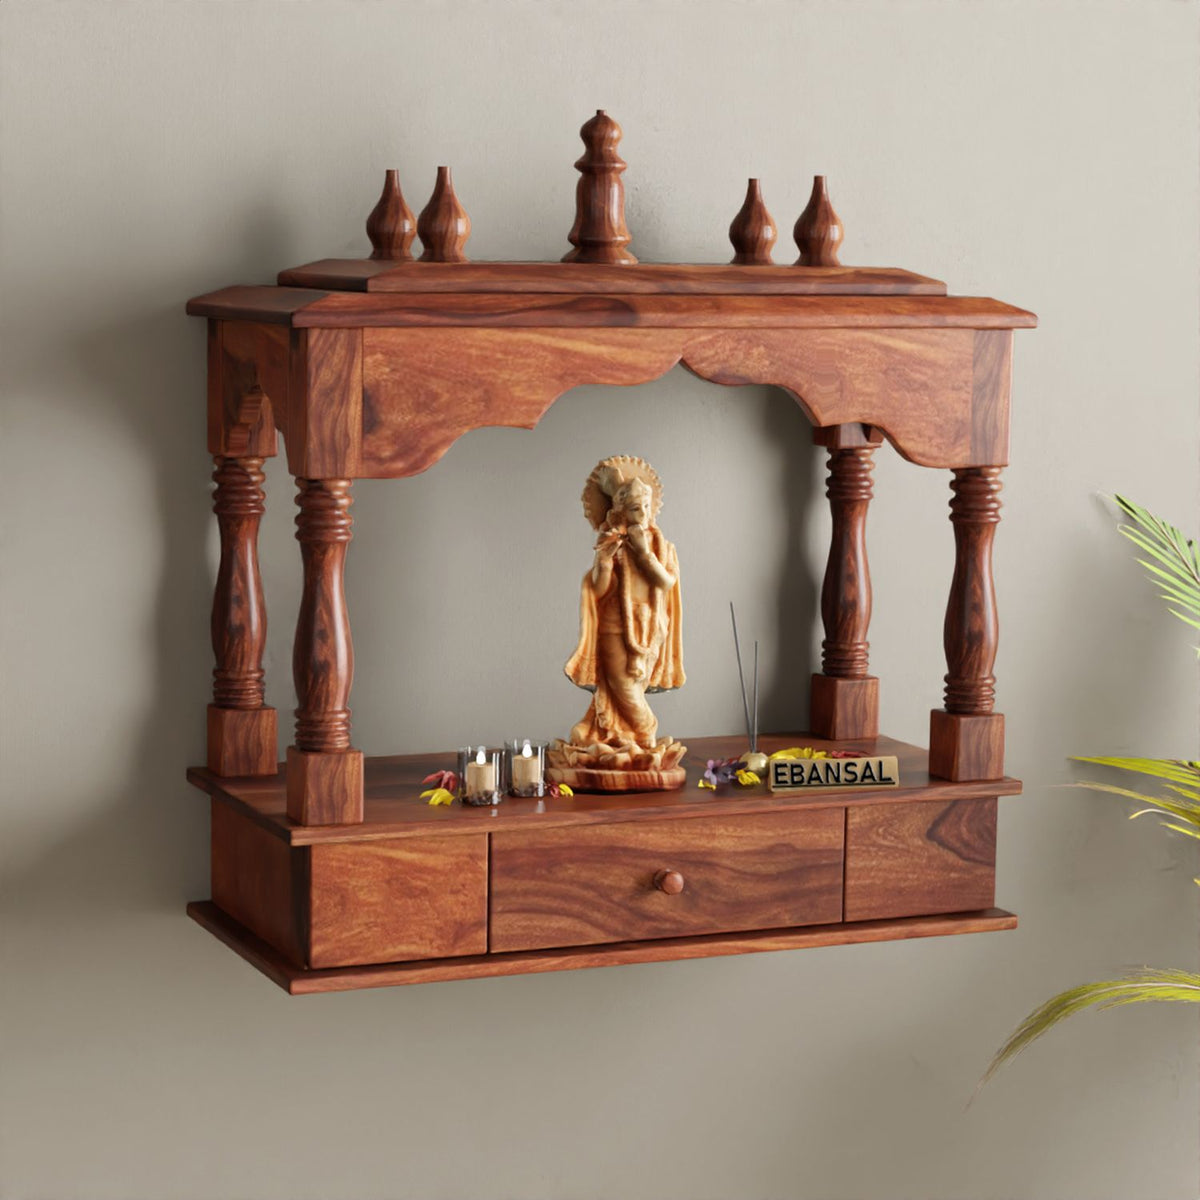 Pray2god Solid Sheesham Wood Temple for Home (Natural Finish)